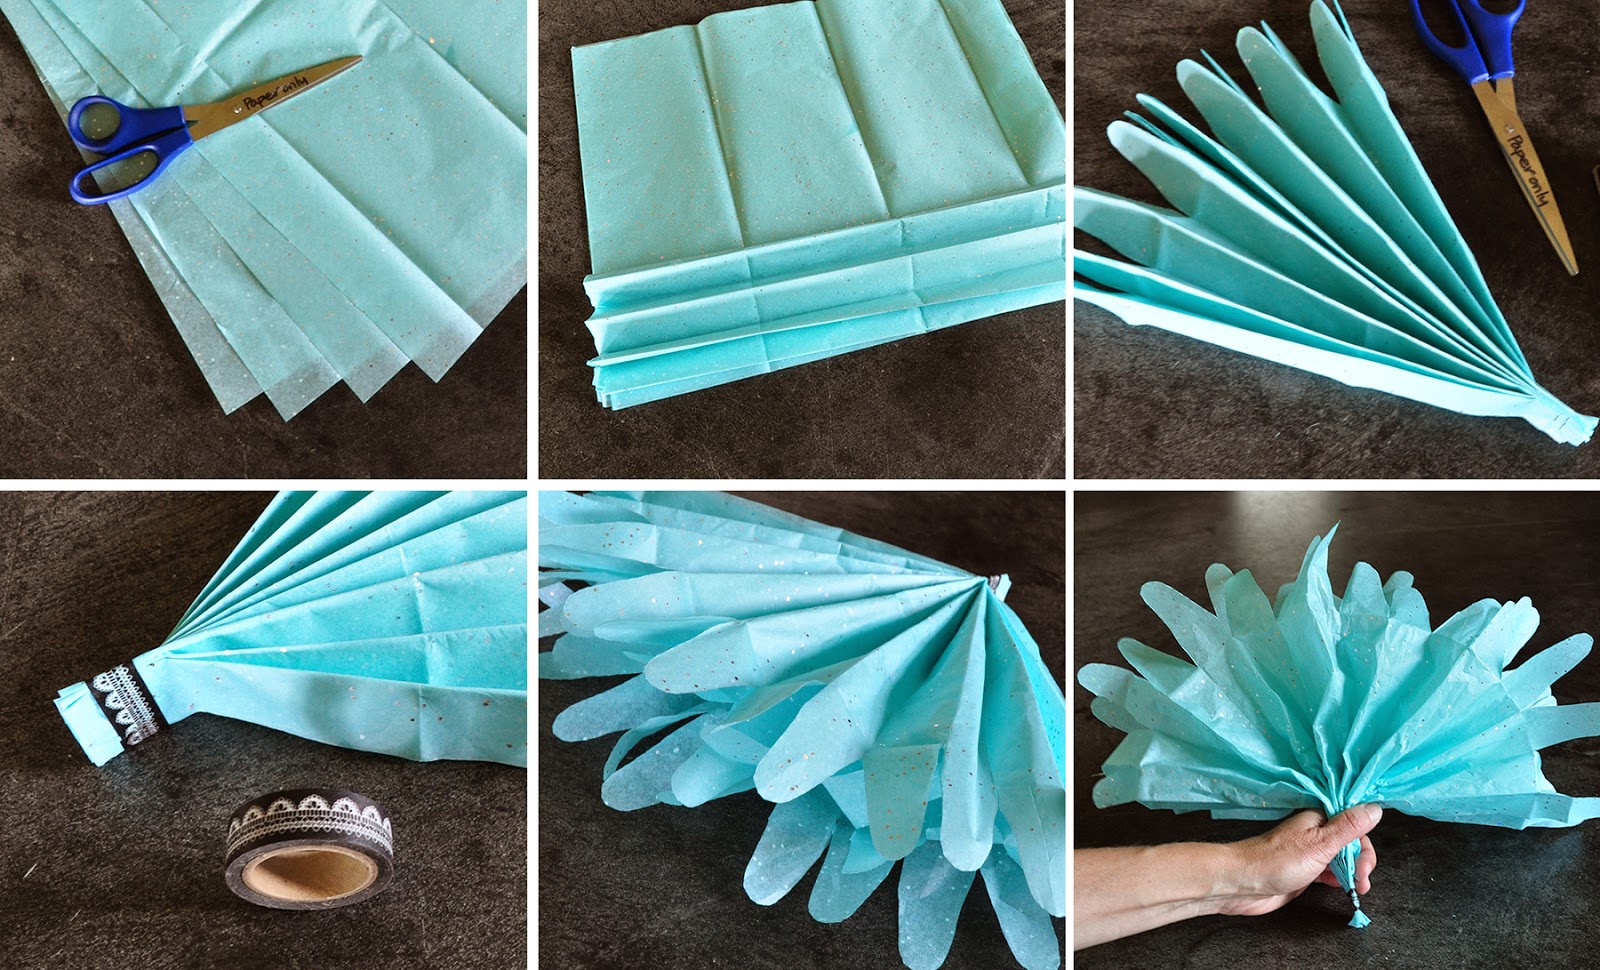 diy tissue paper pom pom gift toppers by Lorrie Everitt from Creative Bag